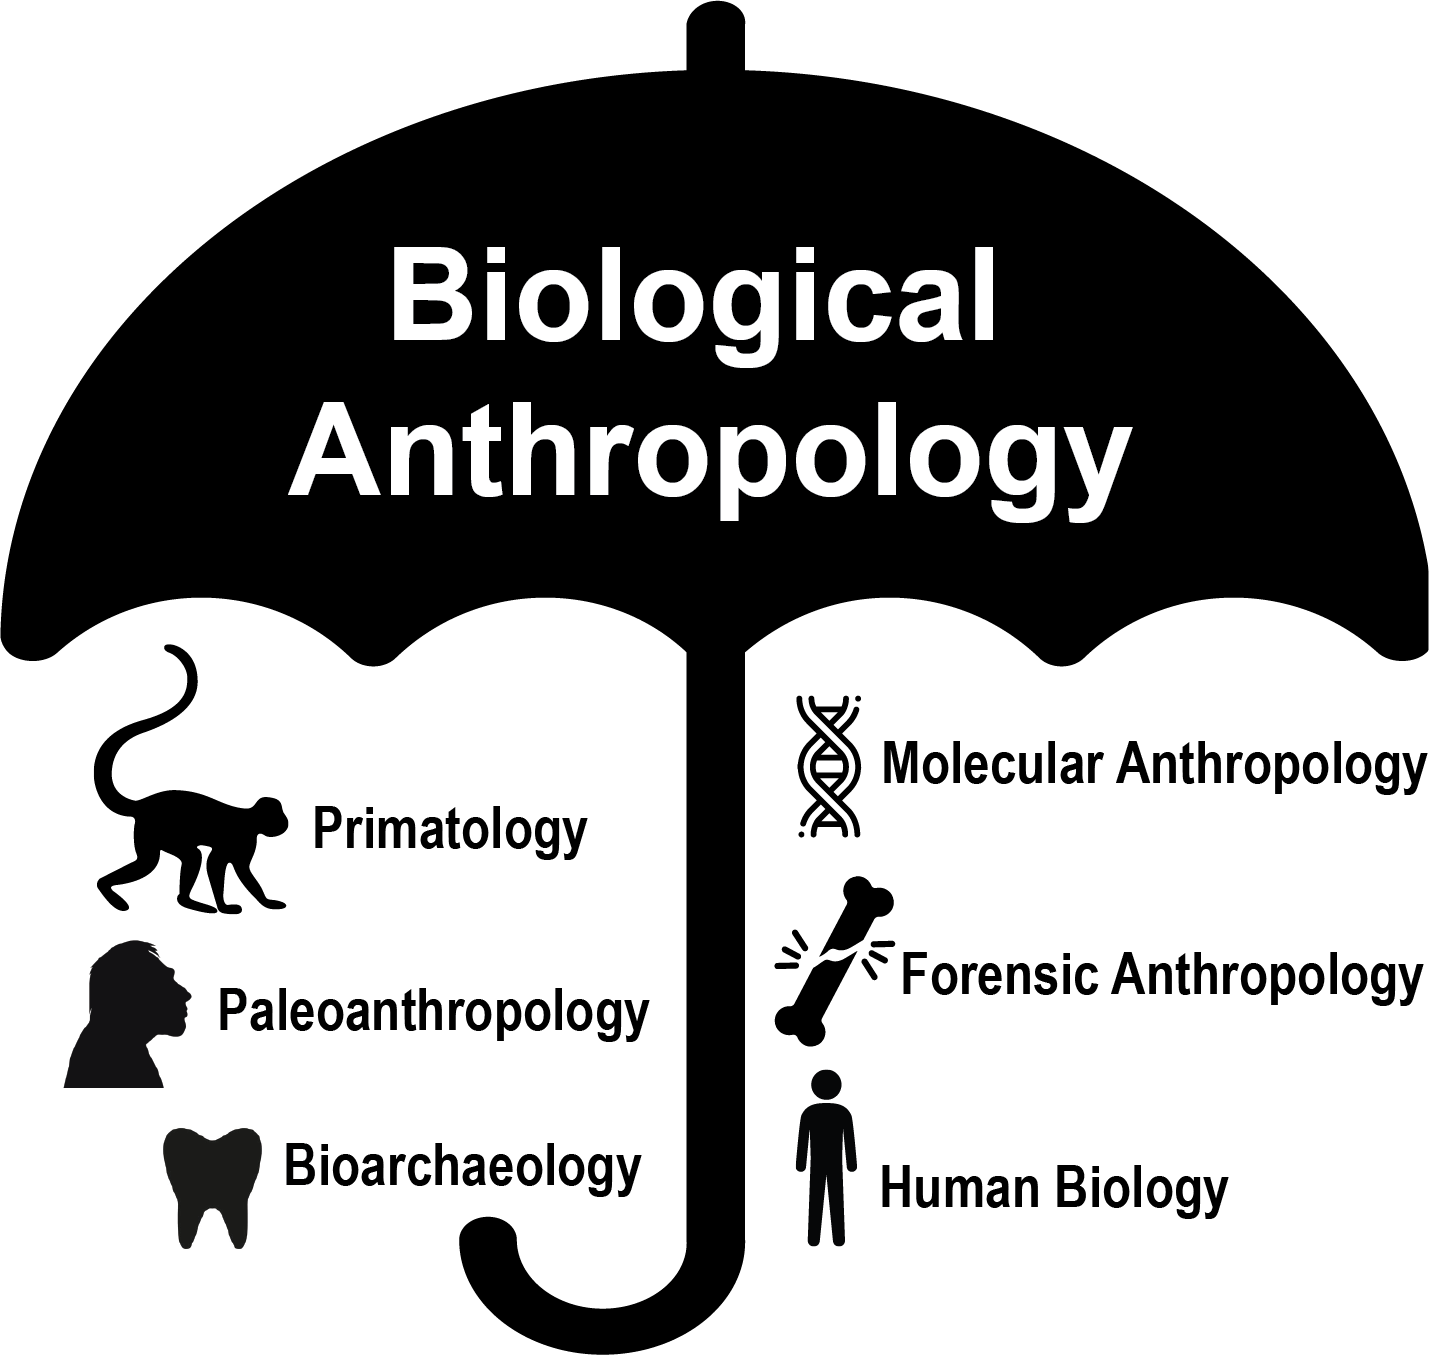 Image showing the six sub-fields of biological anthropology.